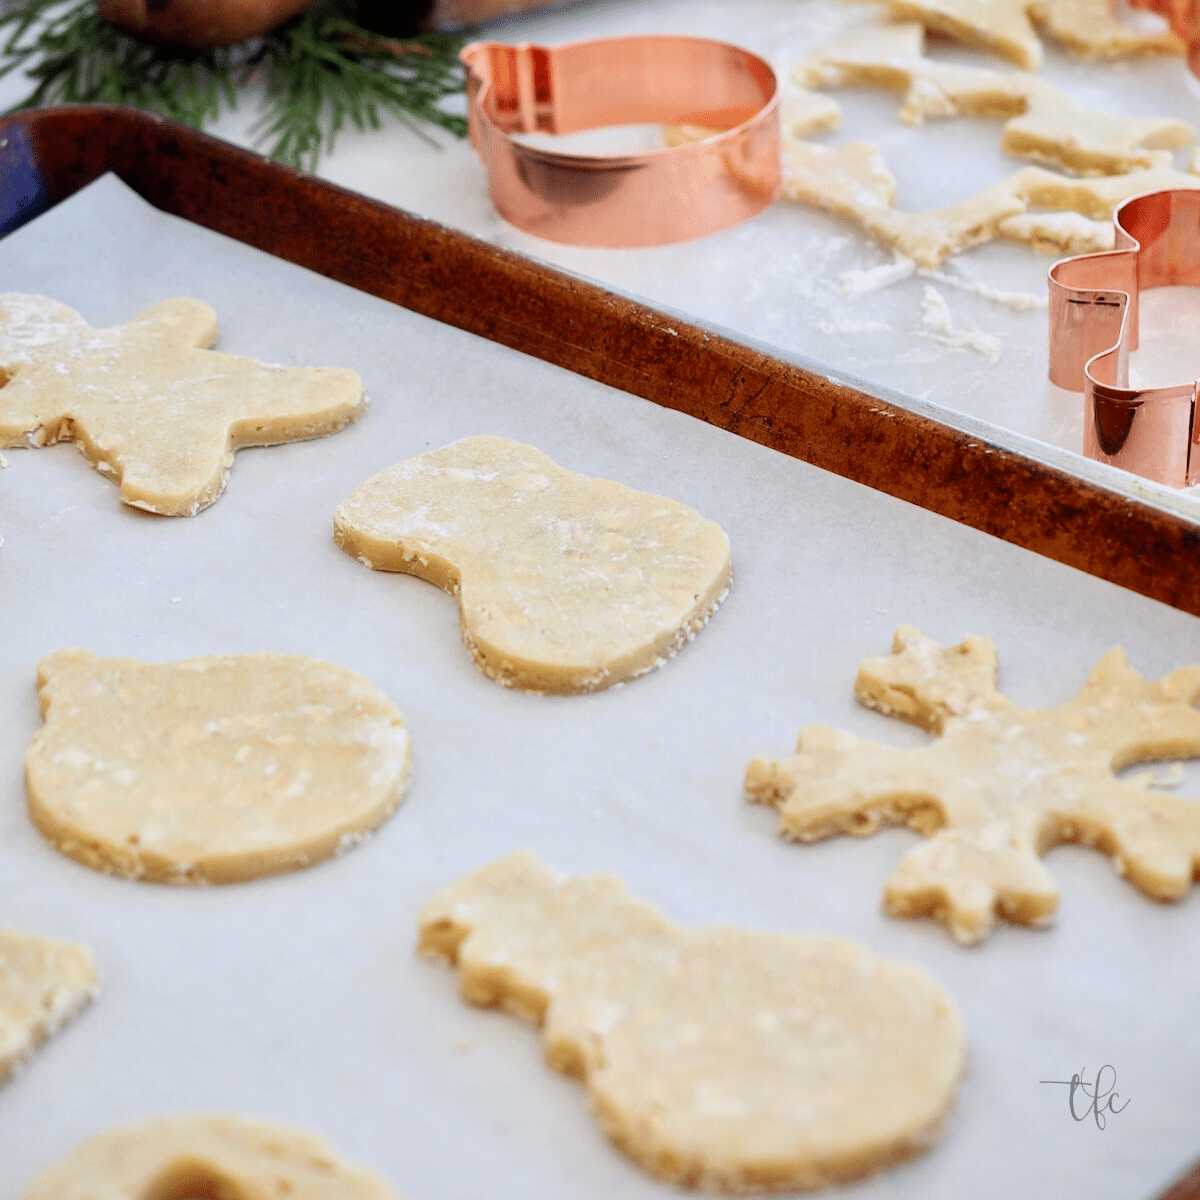 Easy Royal Icing Recipe for Sugar Cookies - House of Nash Eats